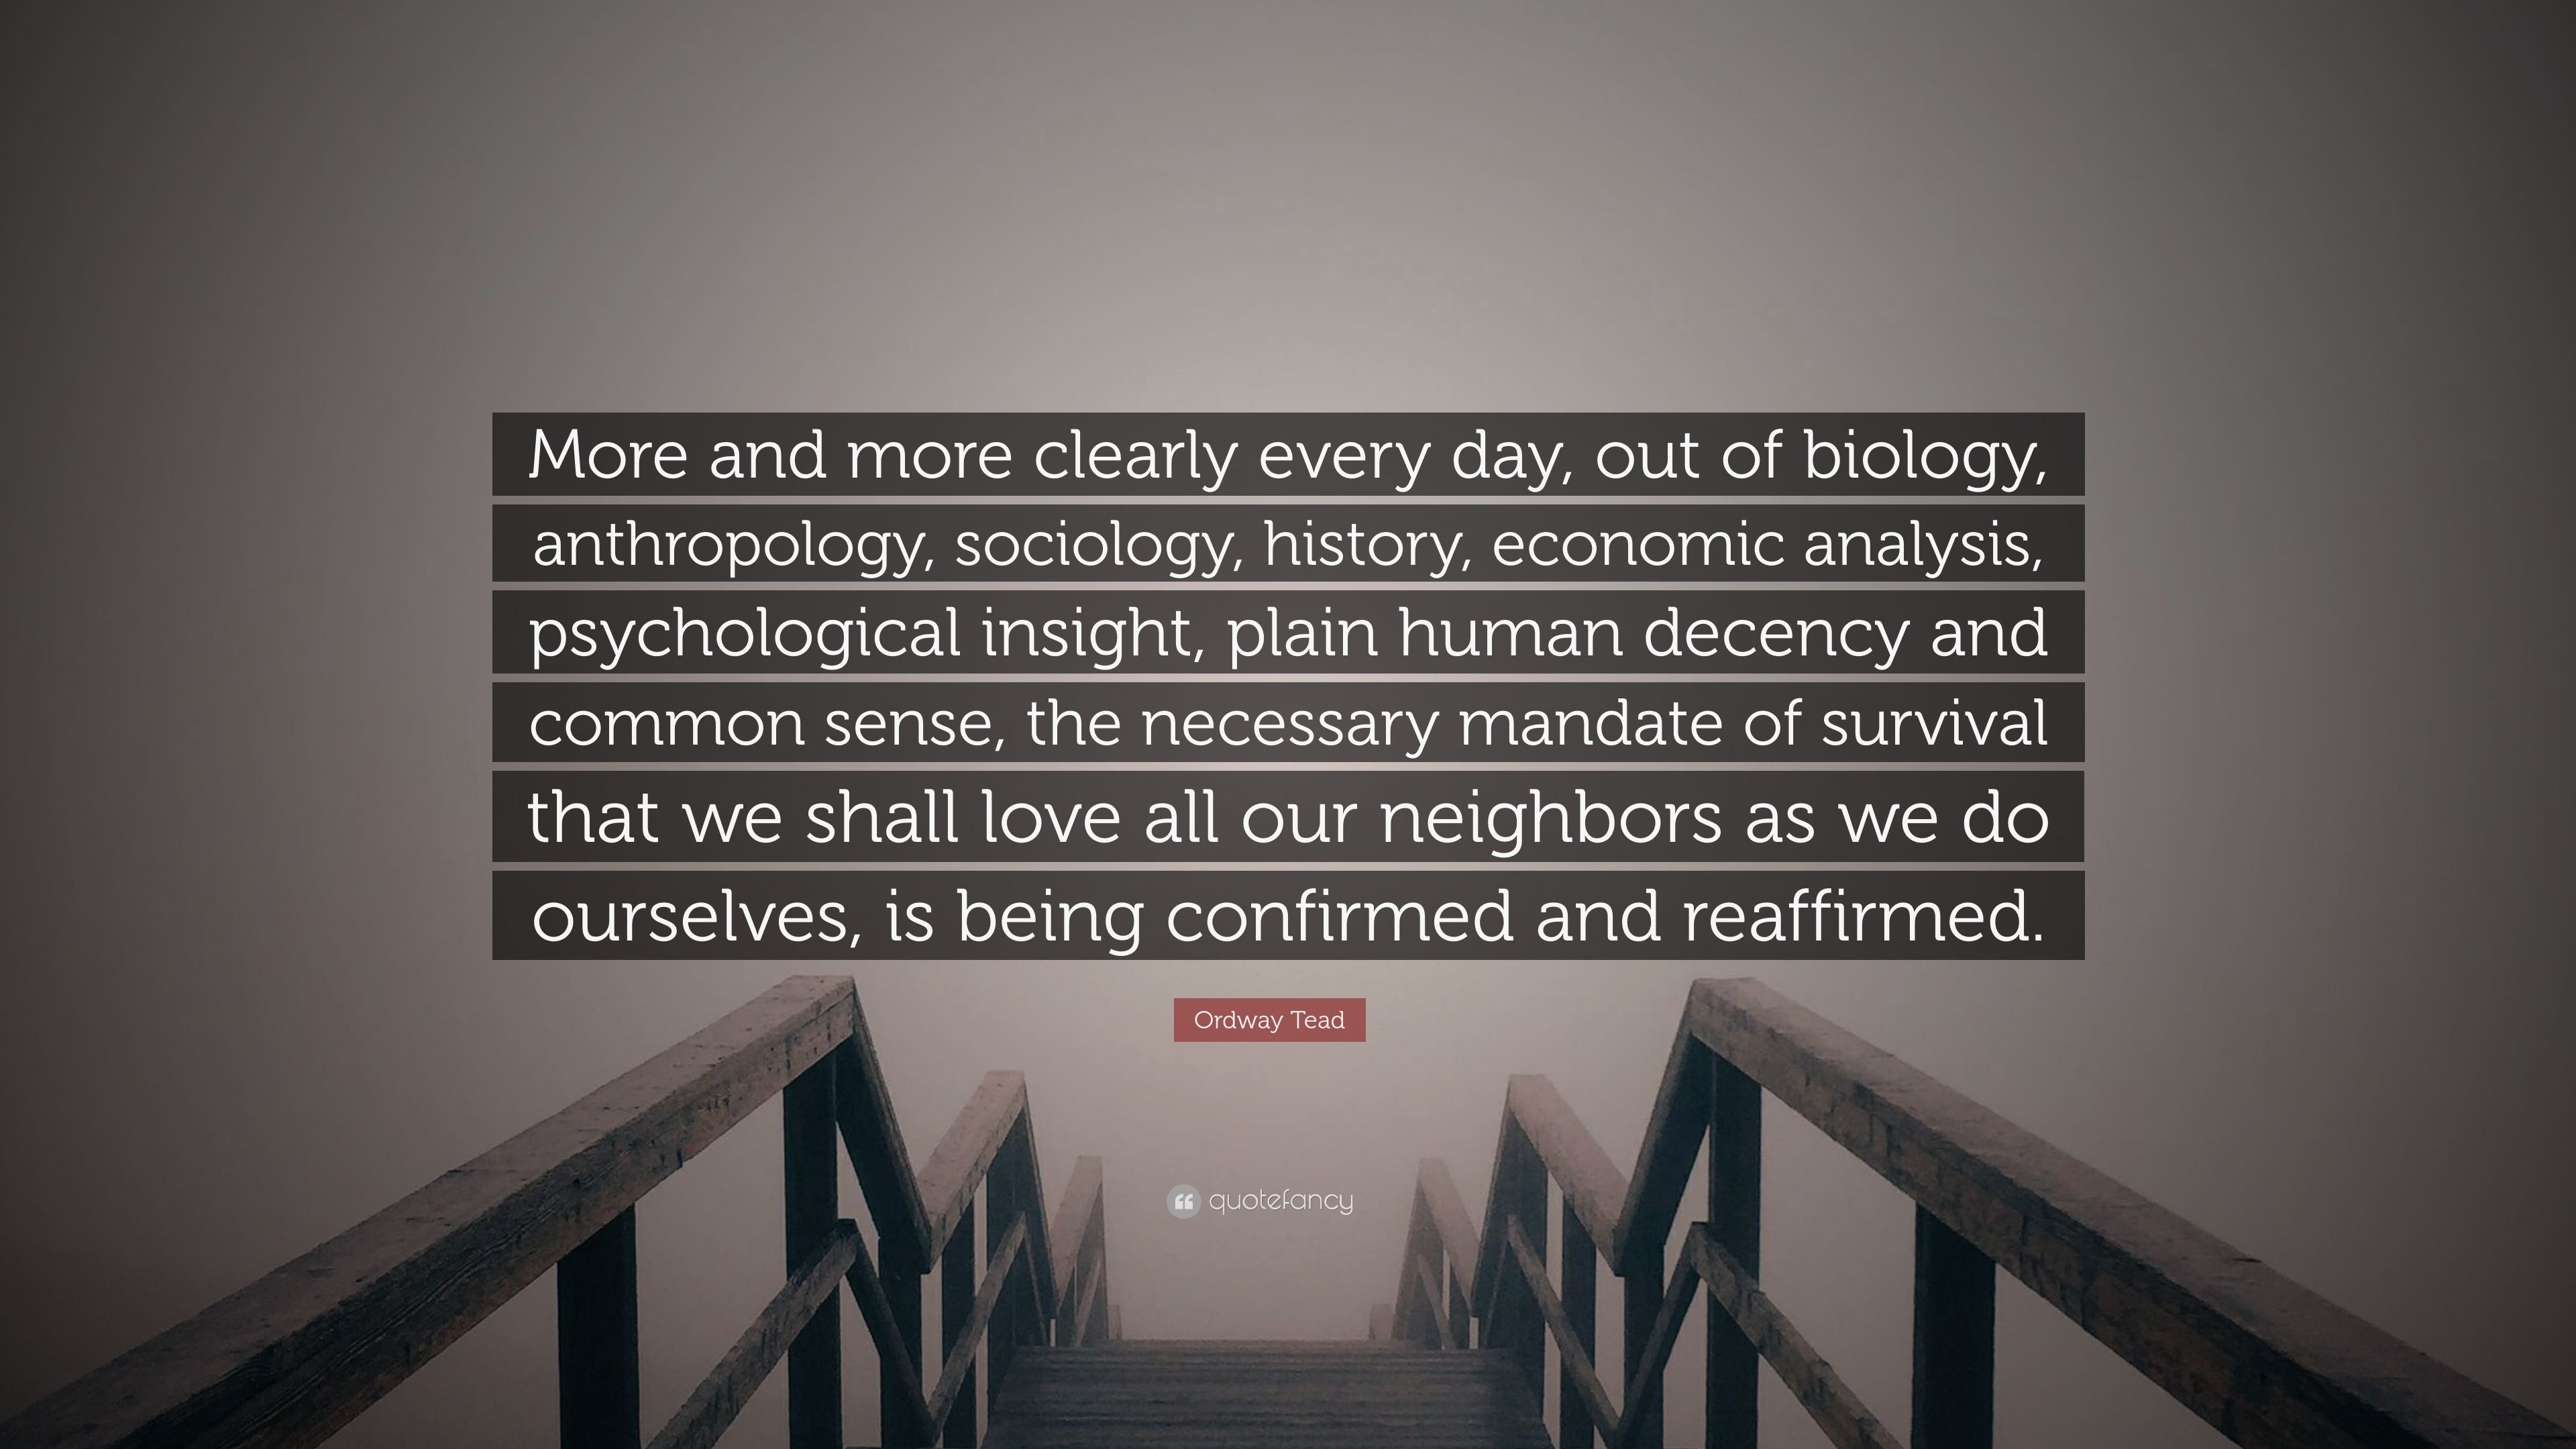 Ordway Tead Quote: “More and more clearly every day, out of biology, anthropology, sociology, history, economic analysis, psychological insi.” (7 wallpaper)